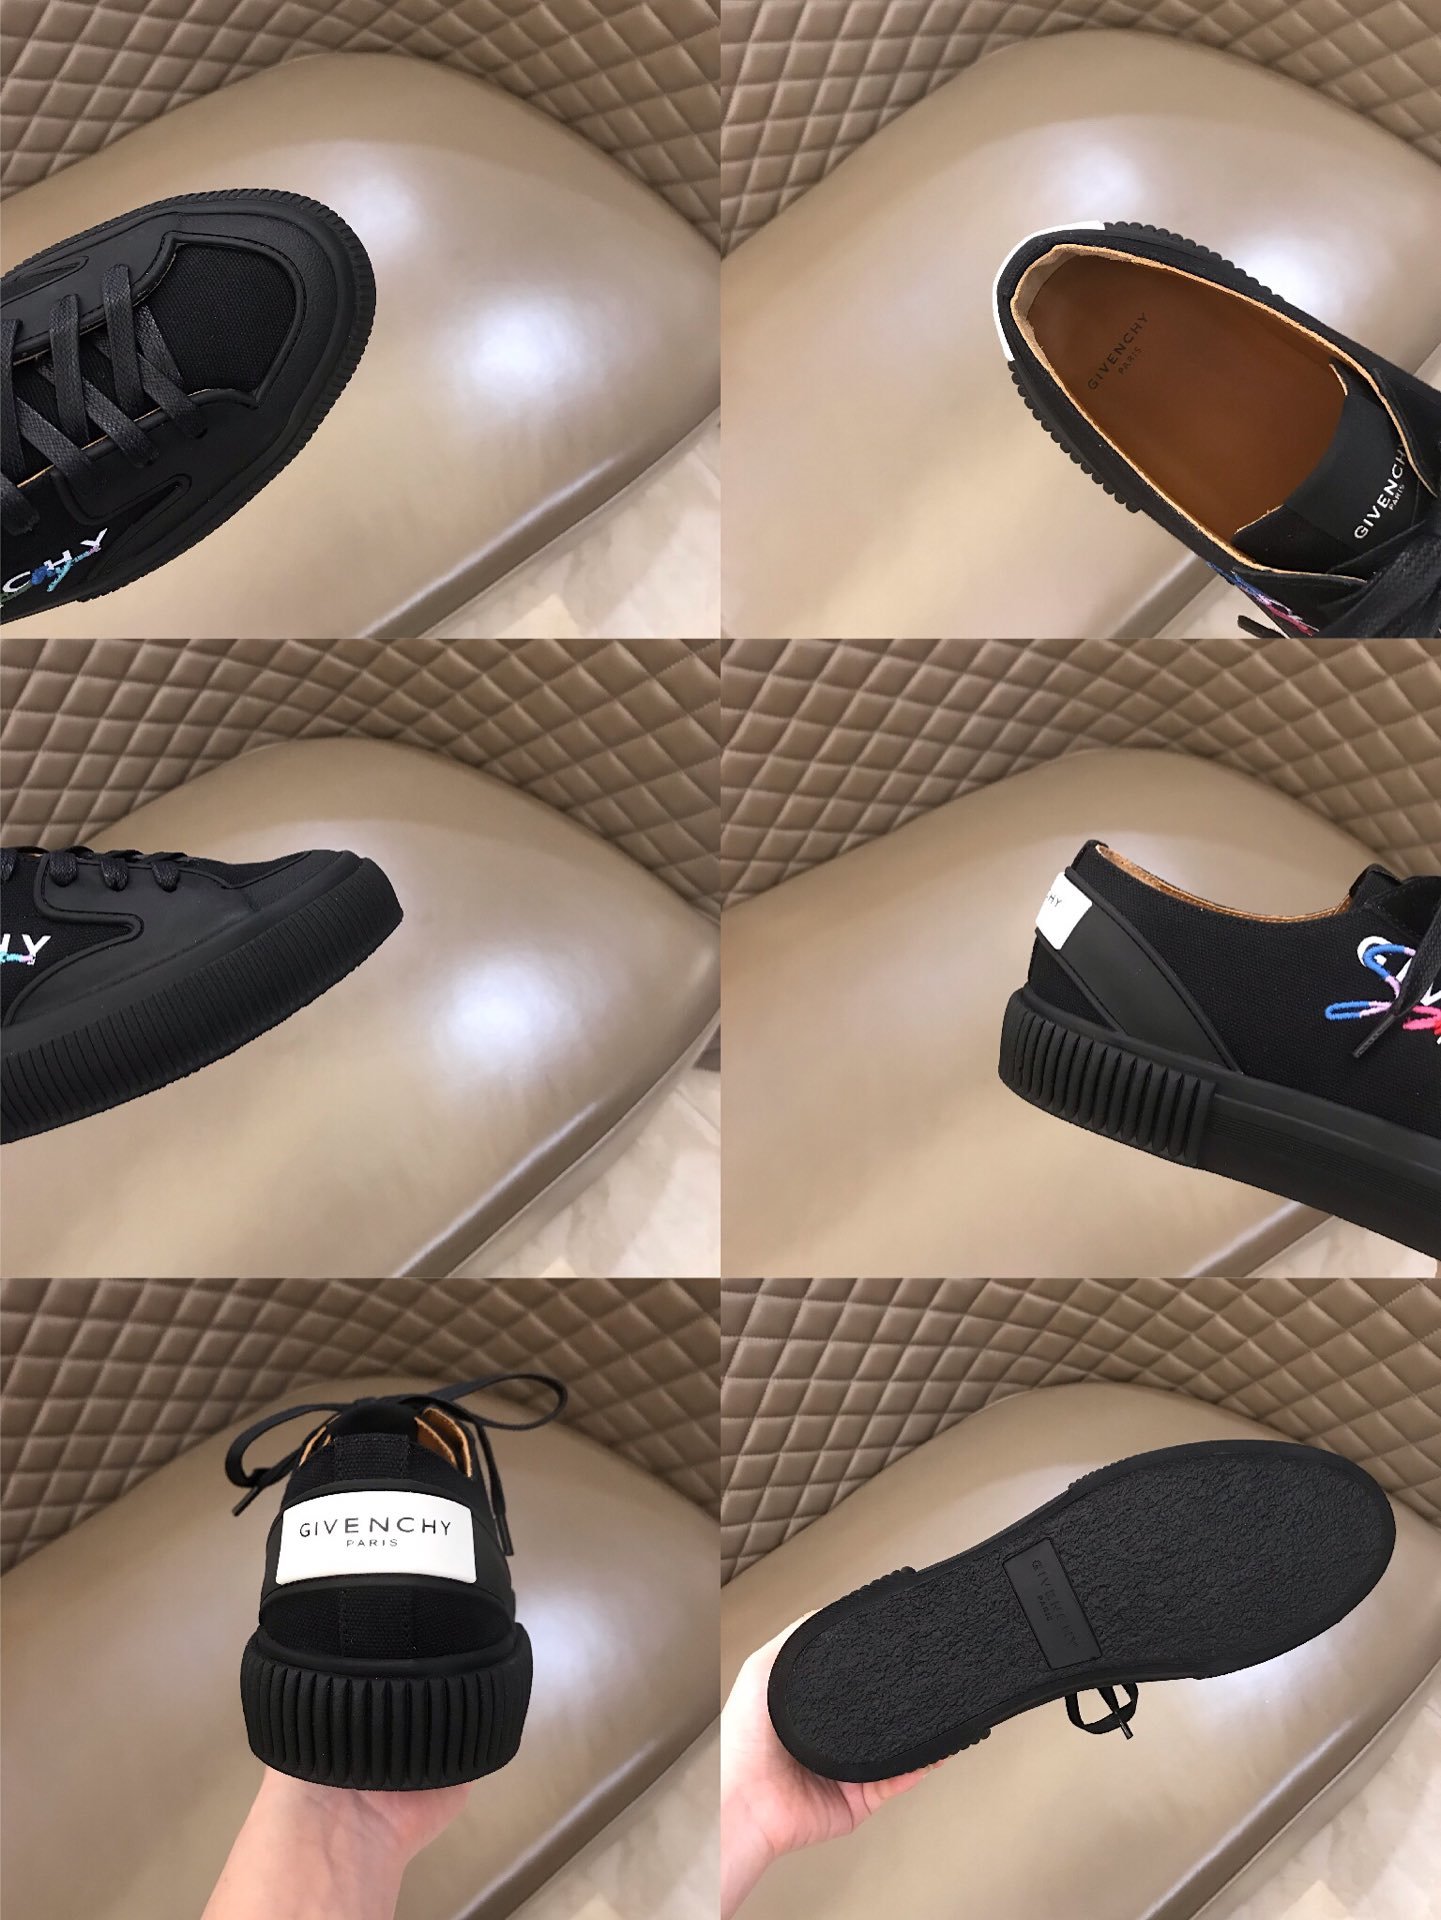 Givenchy High Quality Sneakers black printed and black rubber sole with white heel MS021146